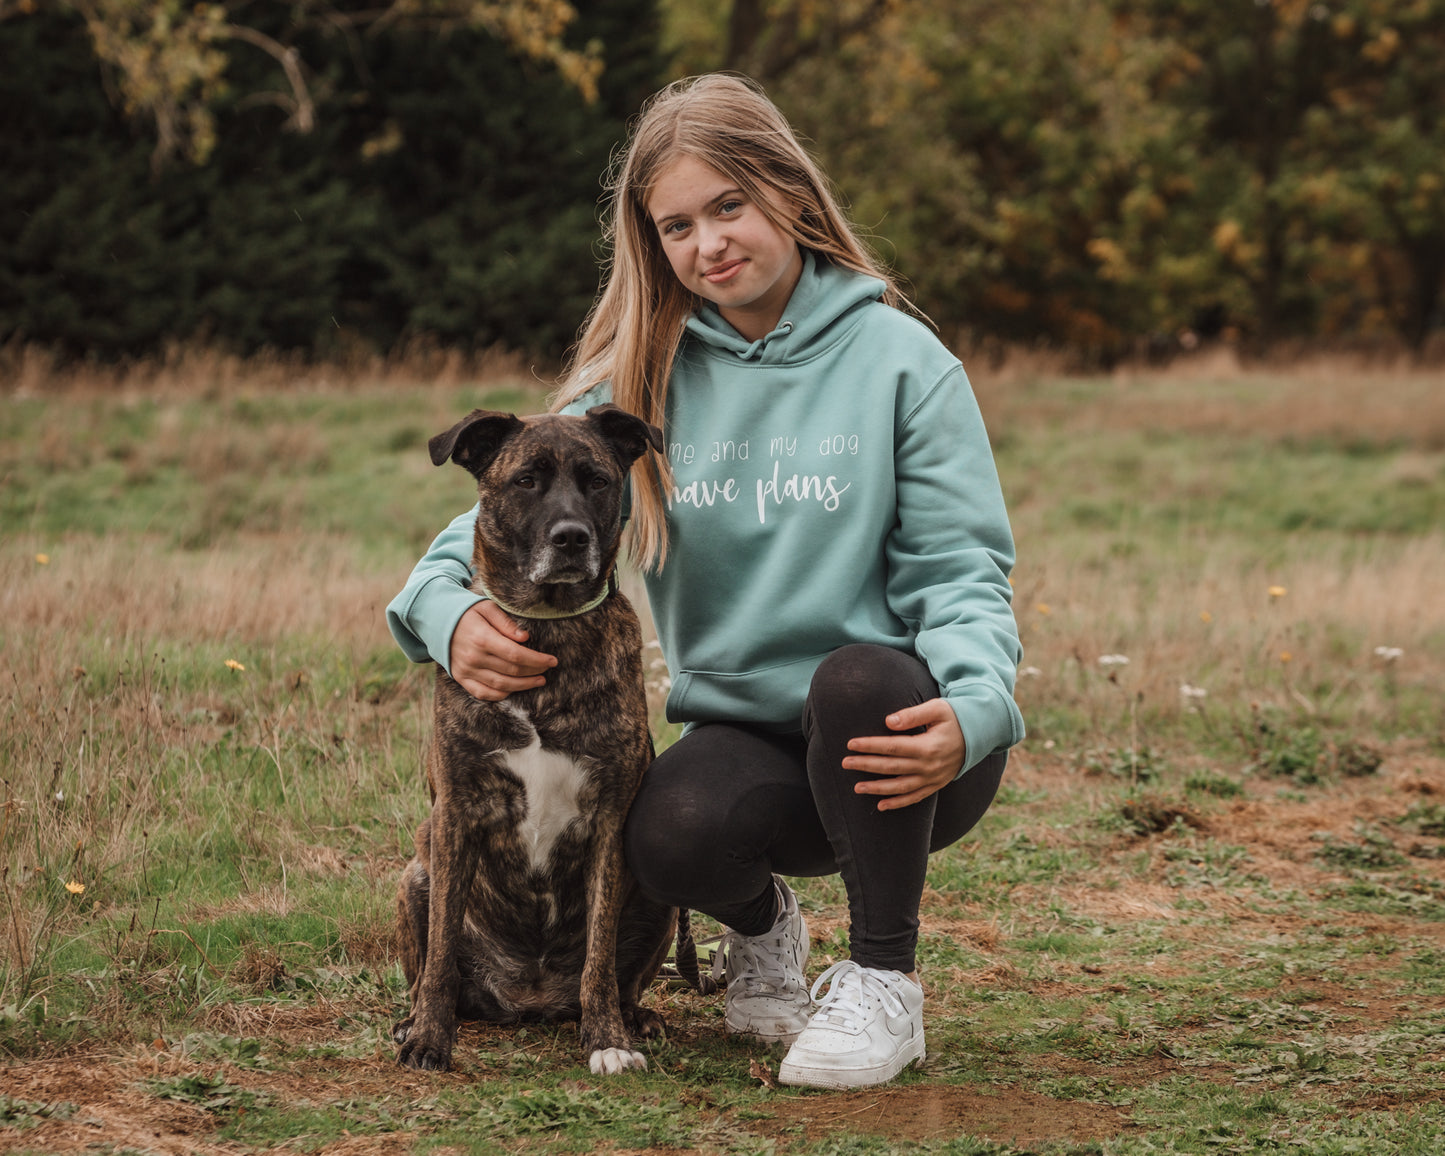 Me And My Dog Have Plans - Luxury Hoodie